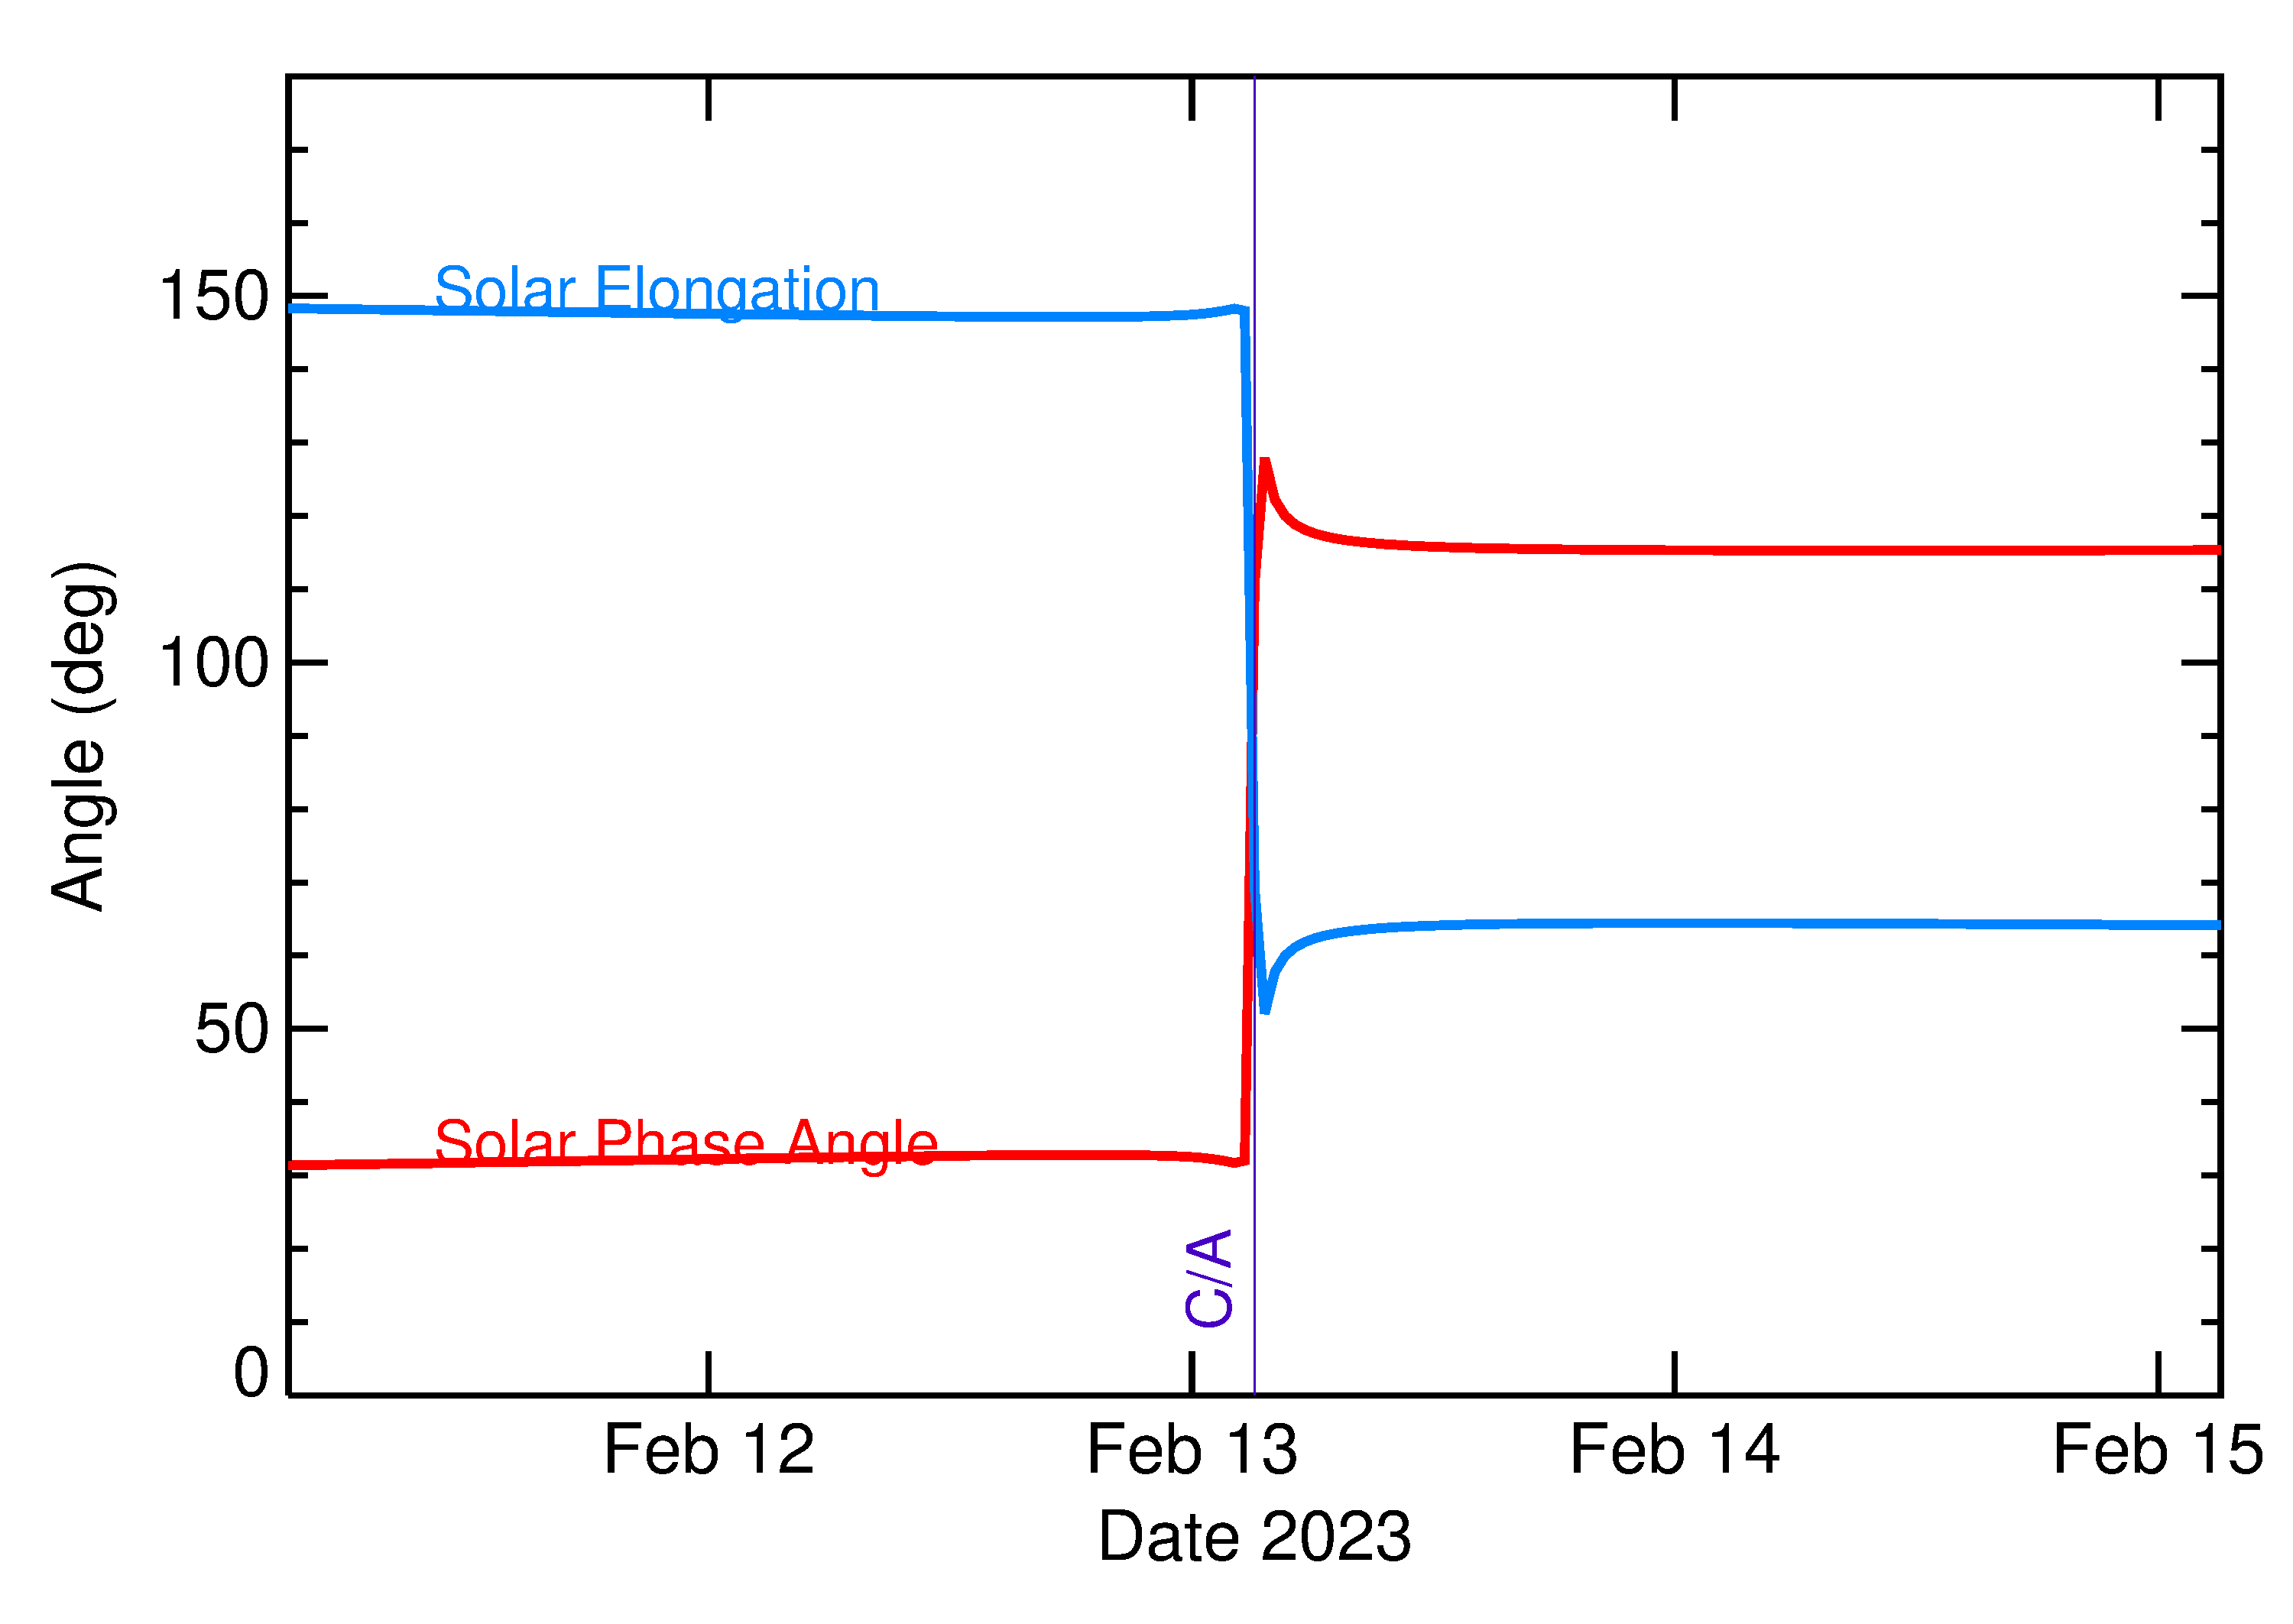 Solar Elongation and Solar Phase Angle of 2023 CX1 in the days around closest approach